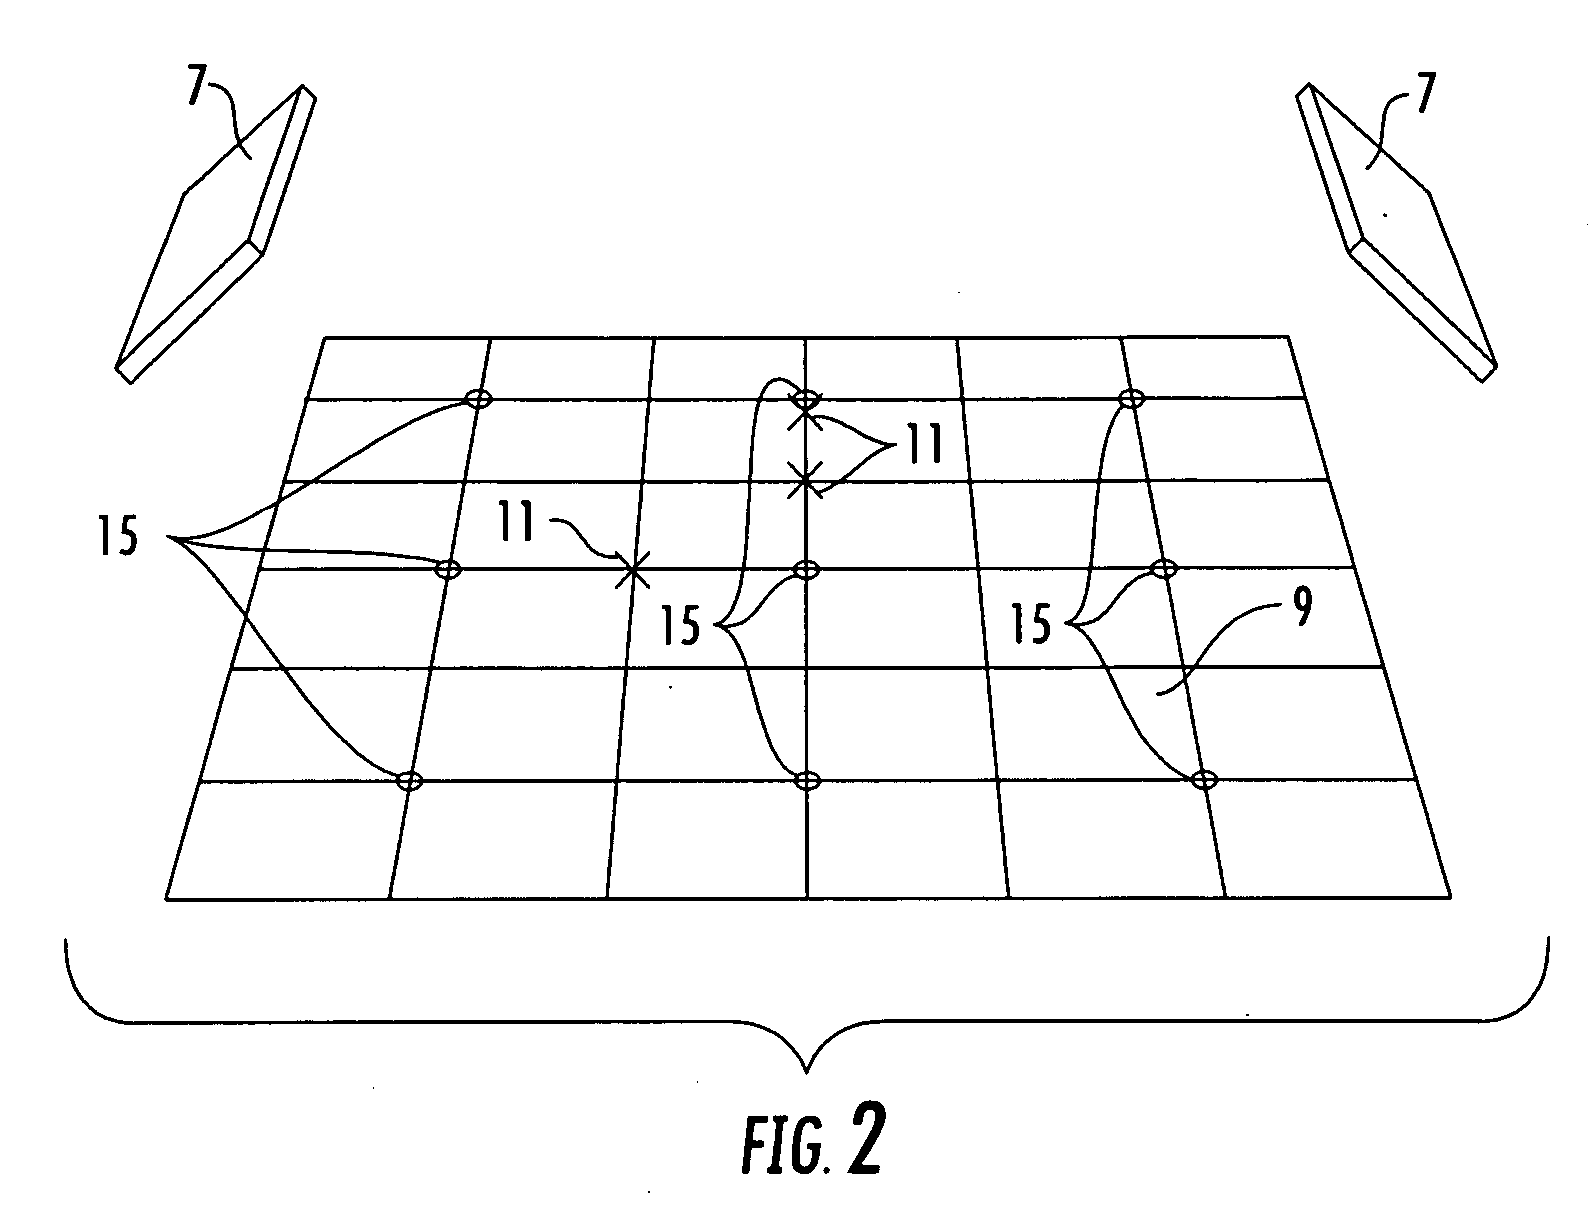 Radio Frequency Environment Object Monitoring System and Methods of Use